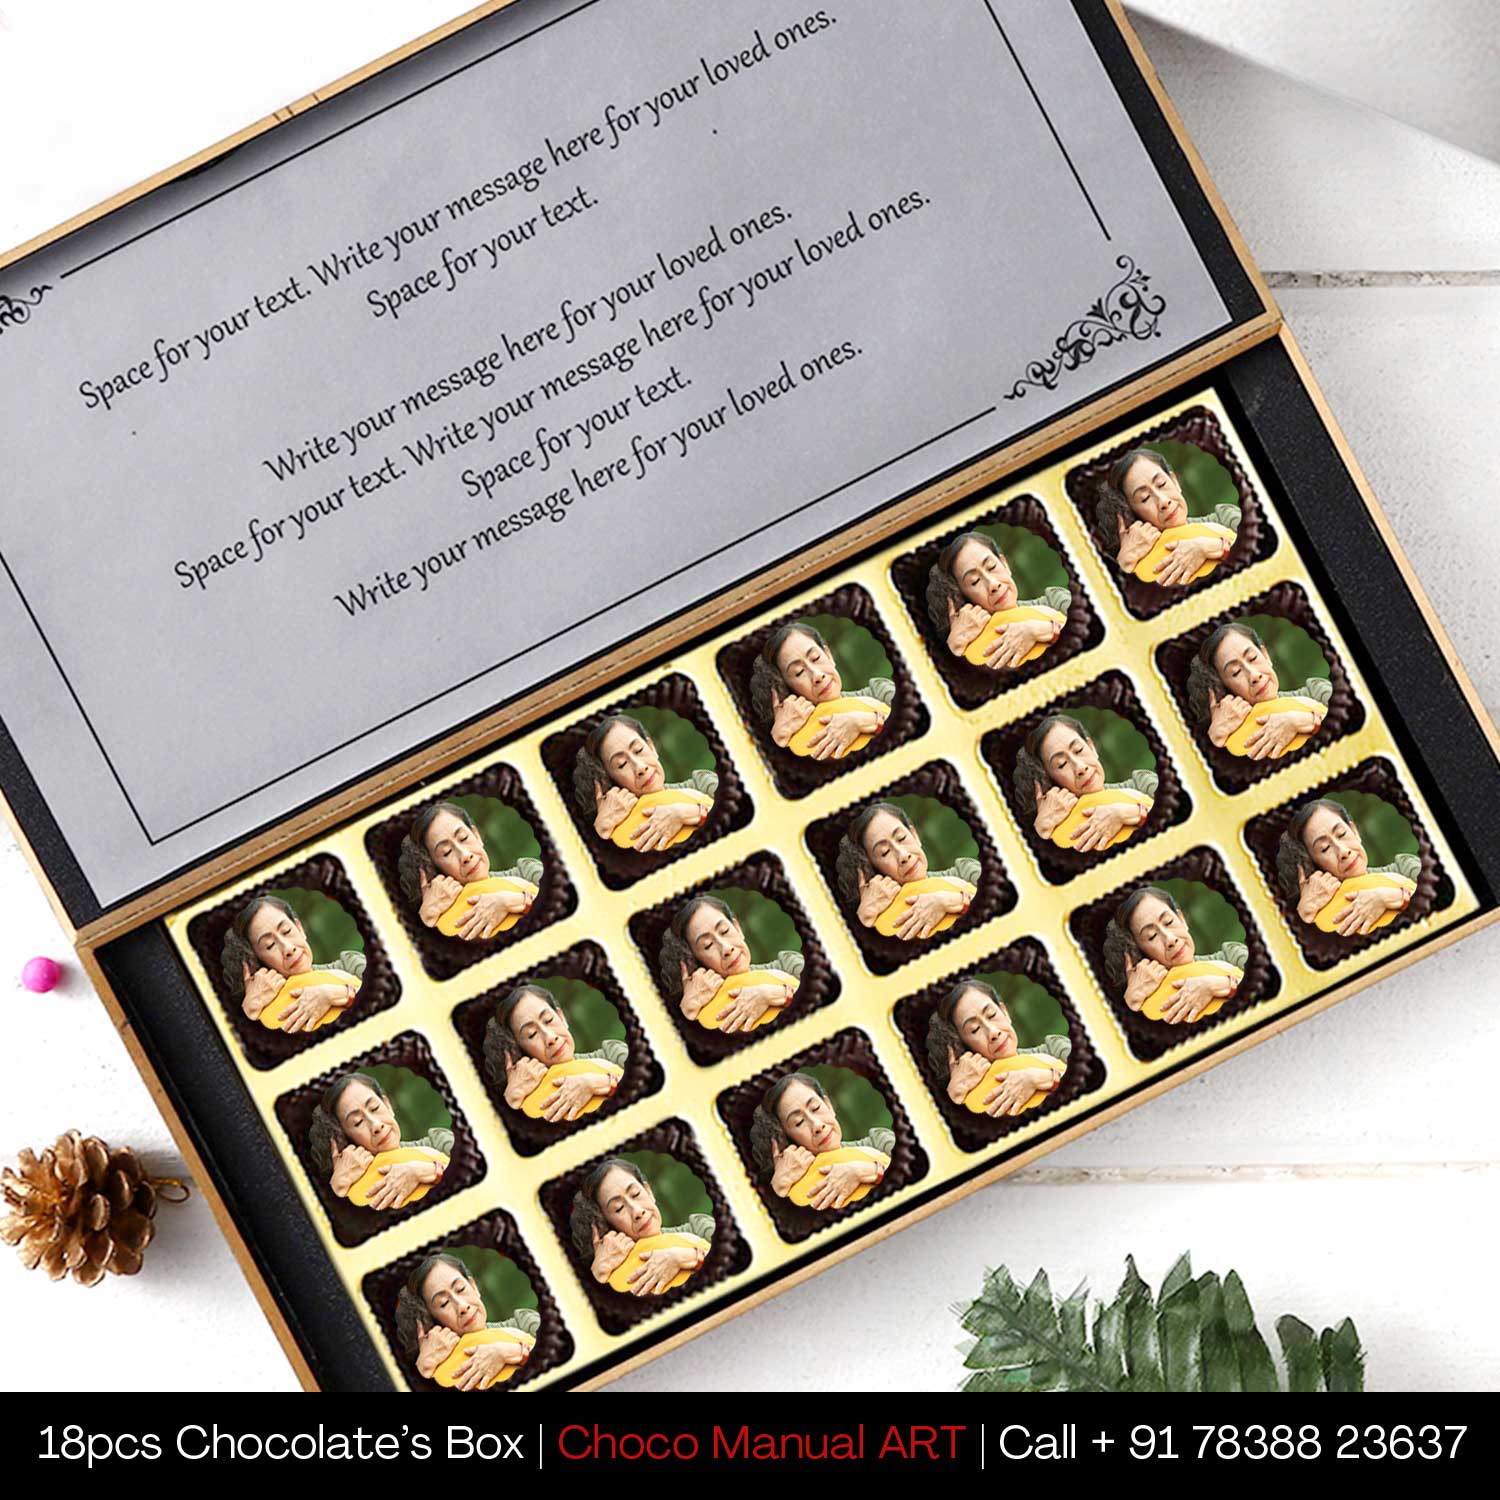 MOM Printed Chocolates with Personalised Gift box